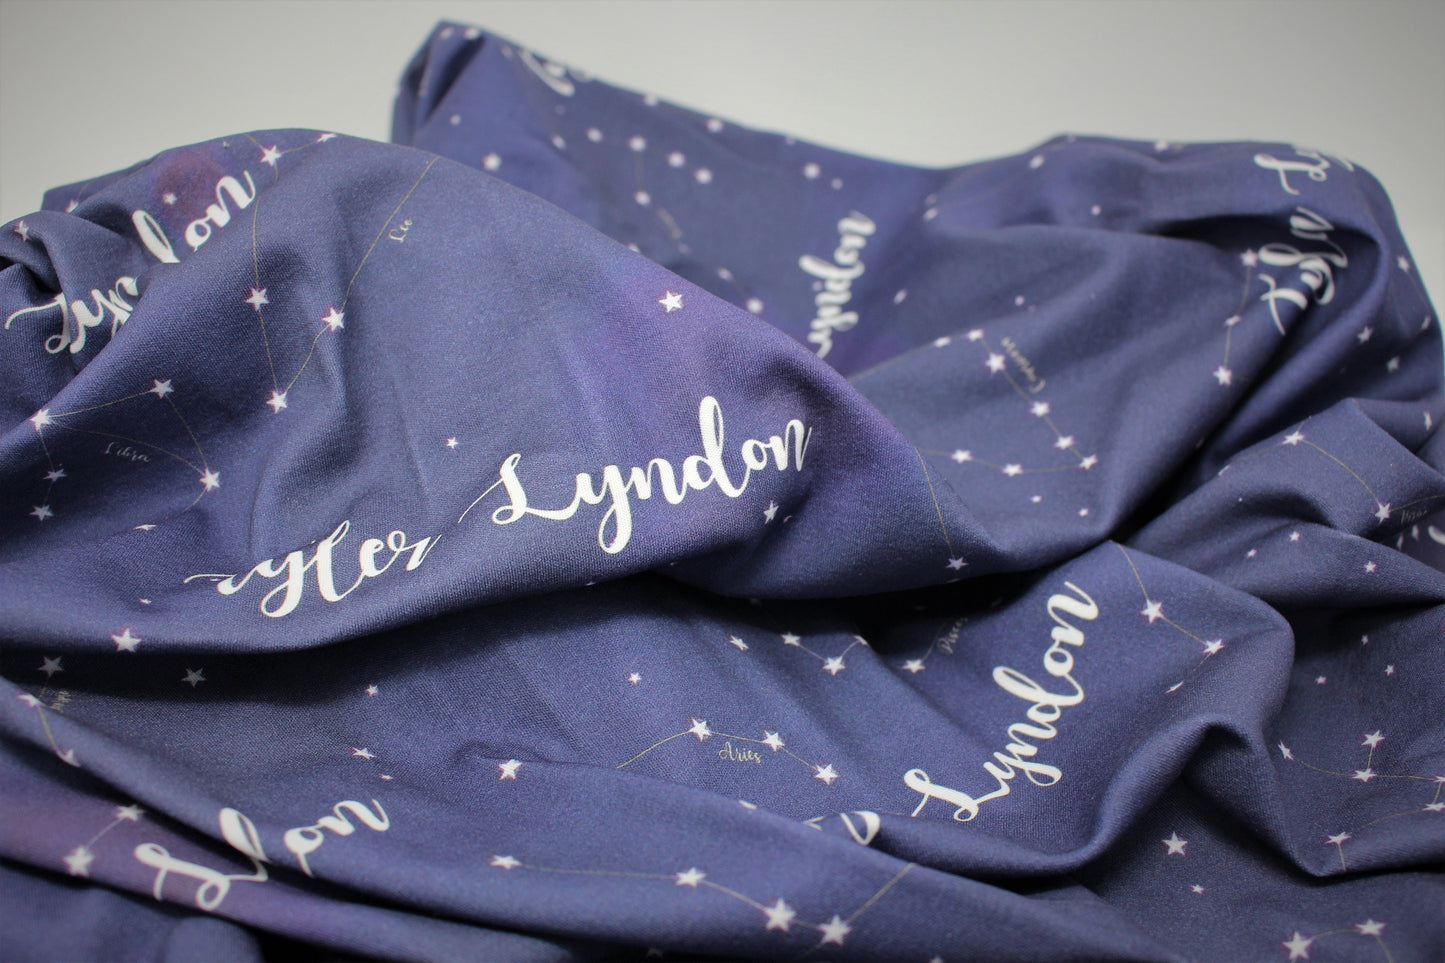 Constellation Blanket/Personalized Blanket/Organic/Swaddling Blanket/ Knit Blanket/Gift for baby/Zodiac/Birth Announcement